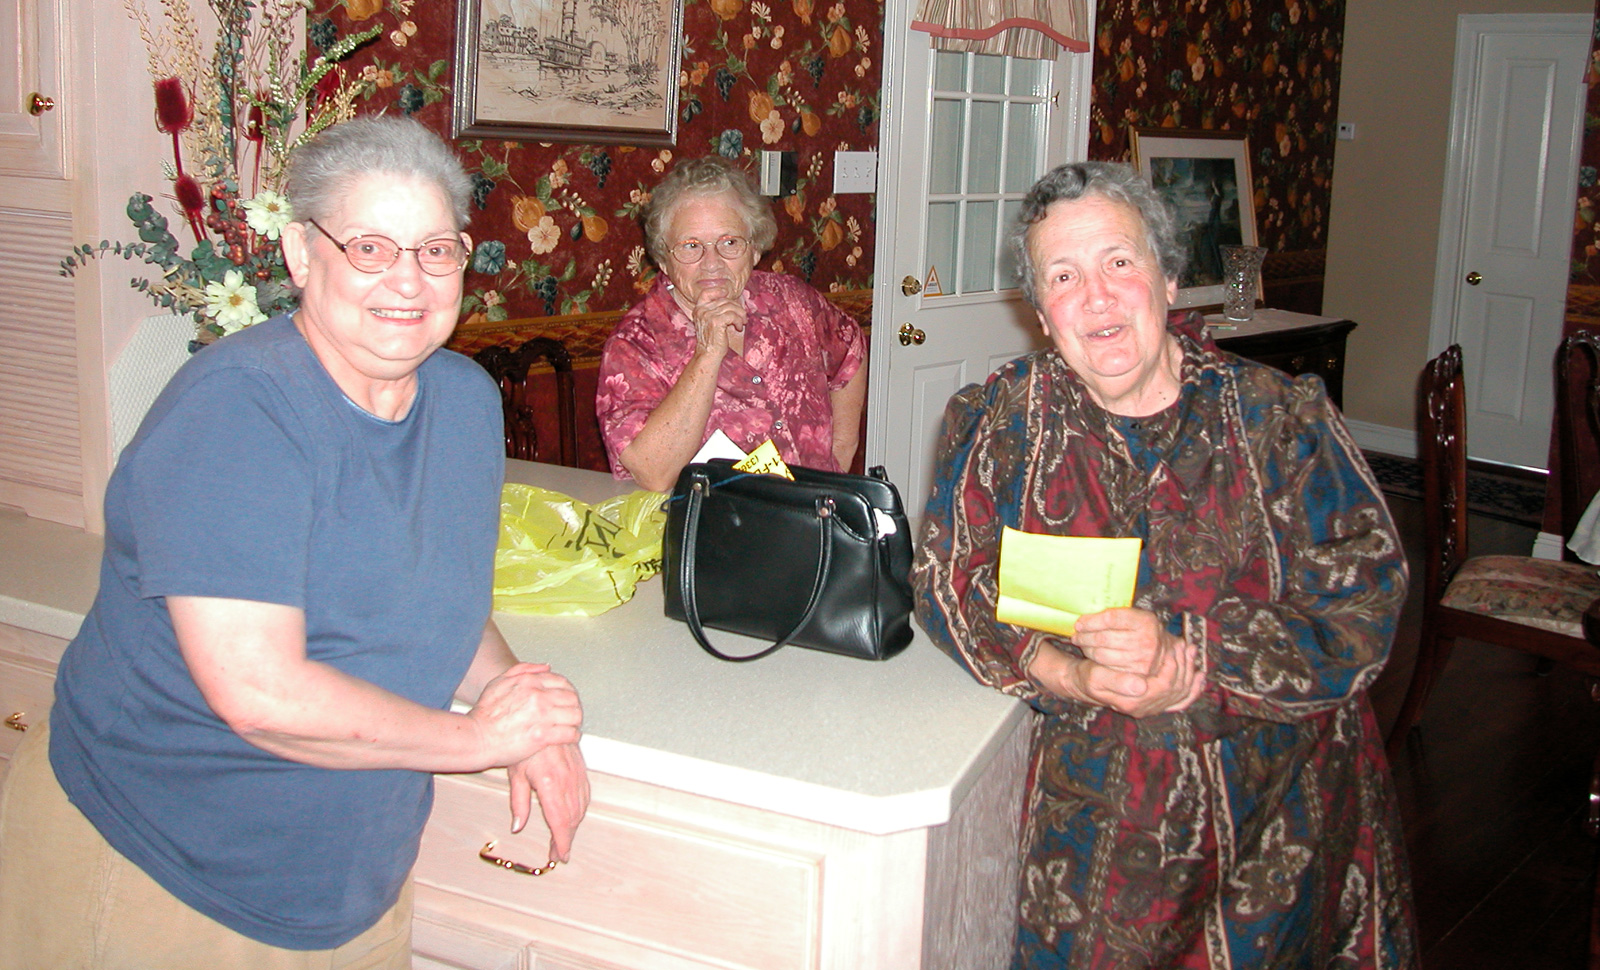 Mom, Sister Jeanette, and her friend Irene in Mom's kitchen